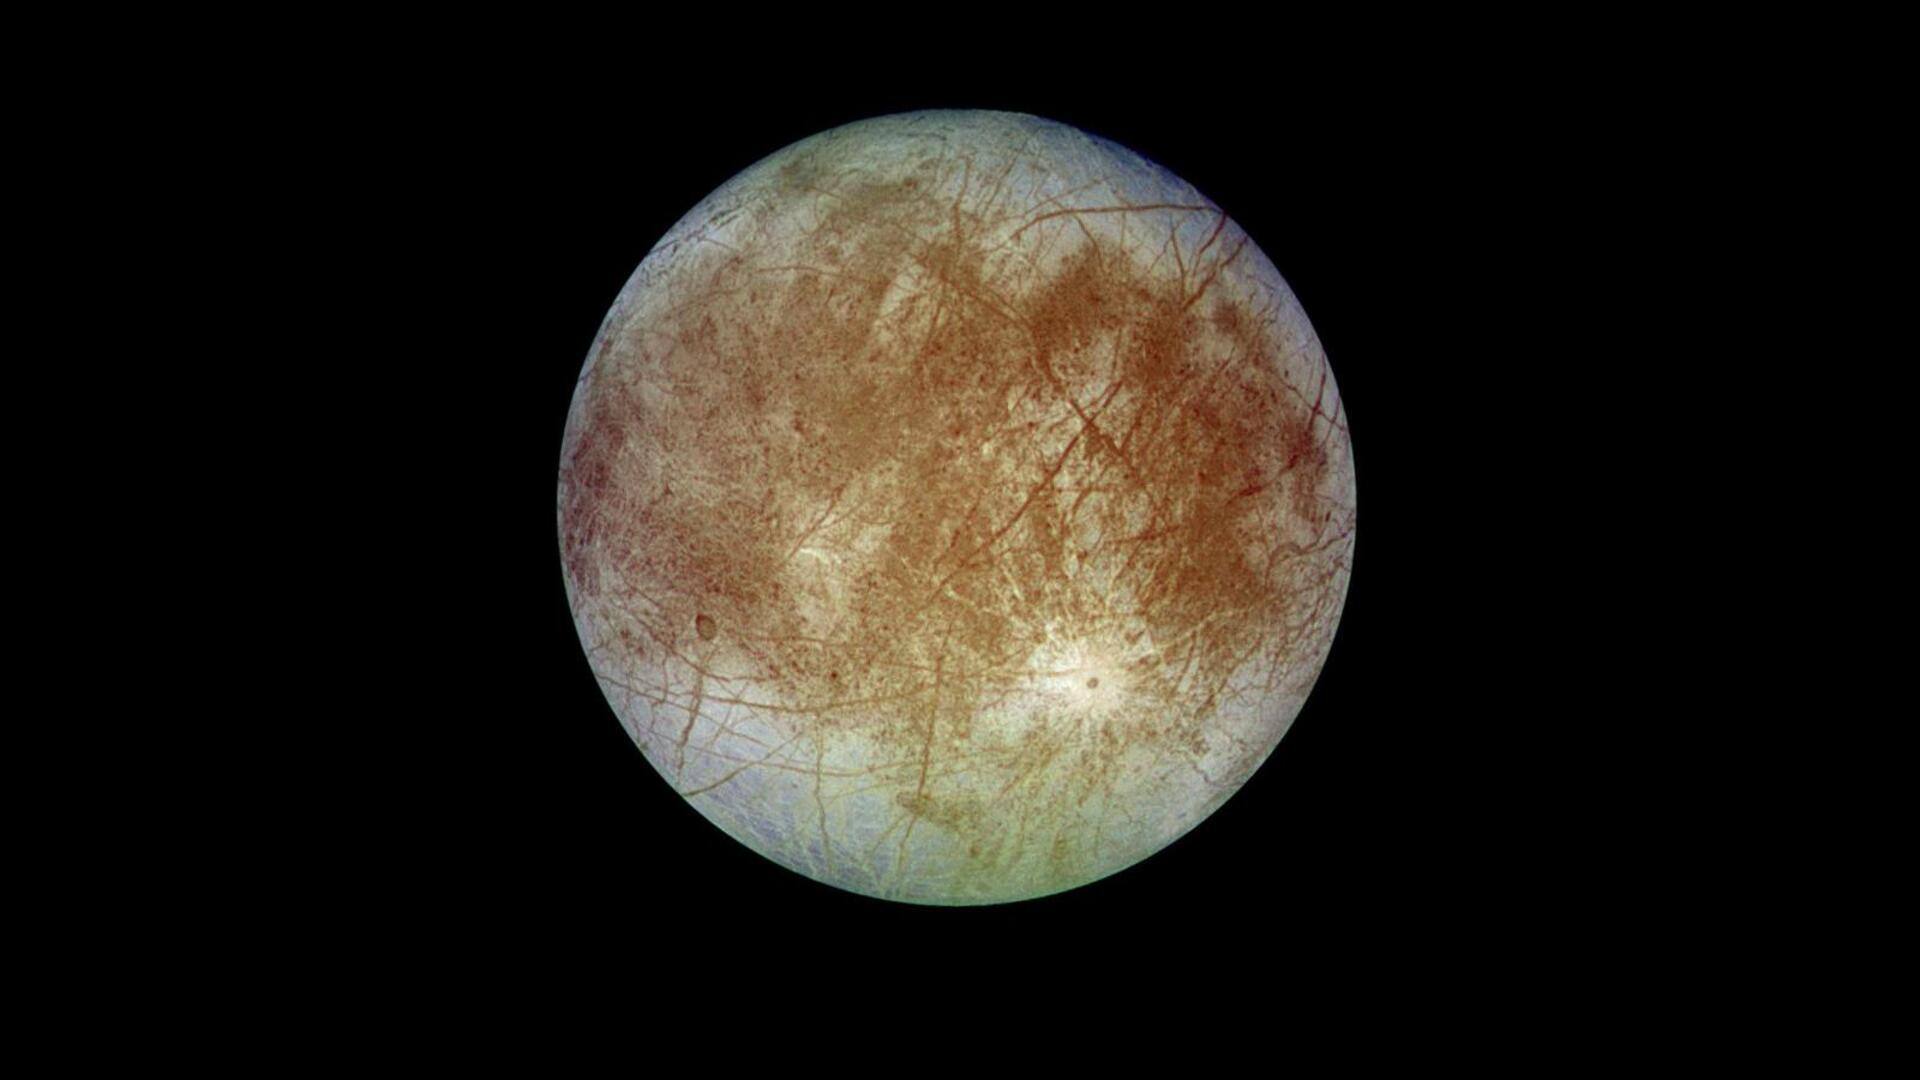 Oxygen levels on Jupiter's moon Europa lower than expected